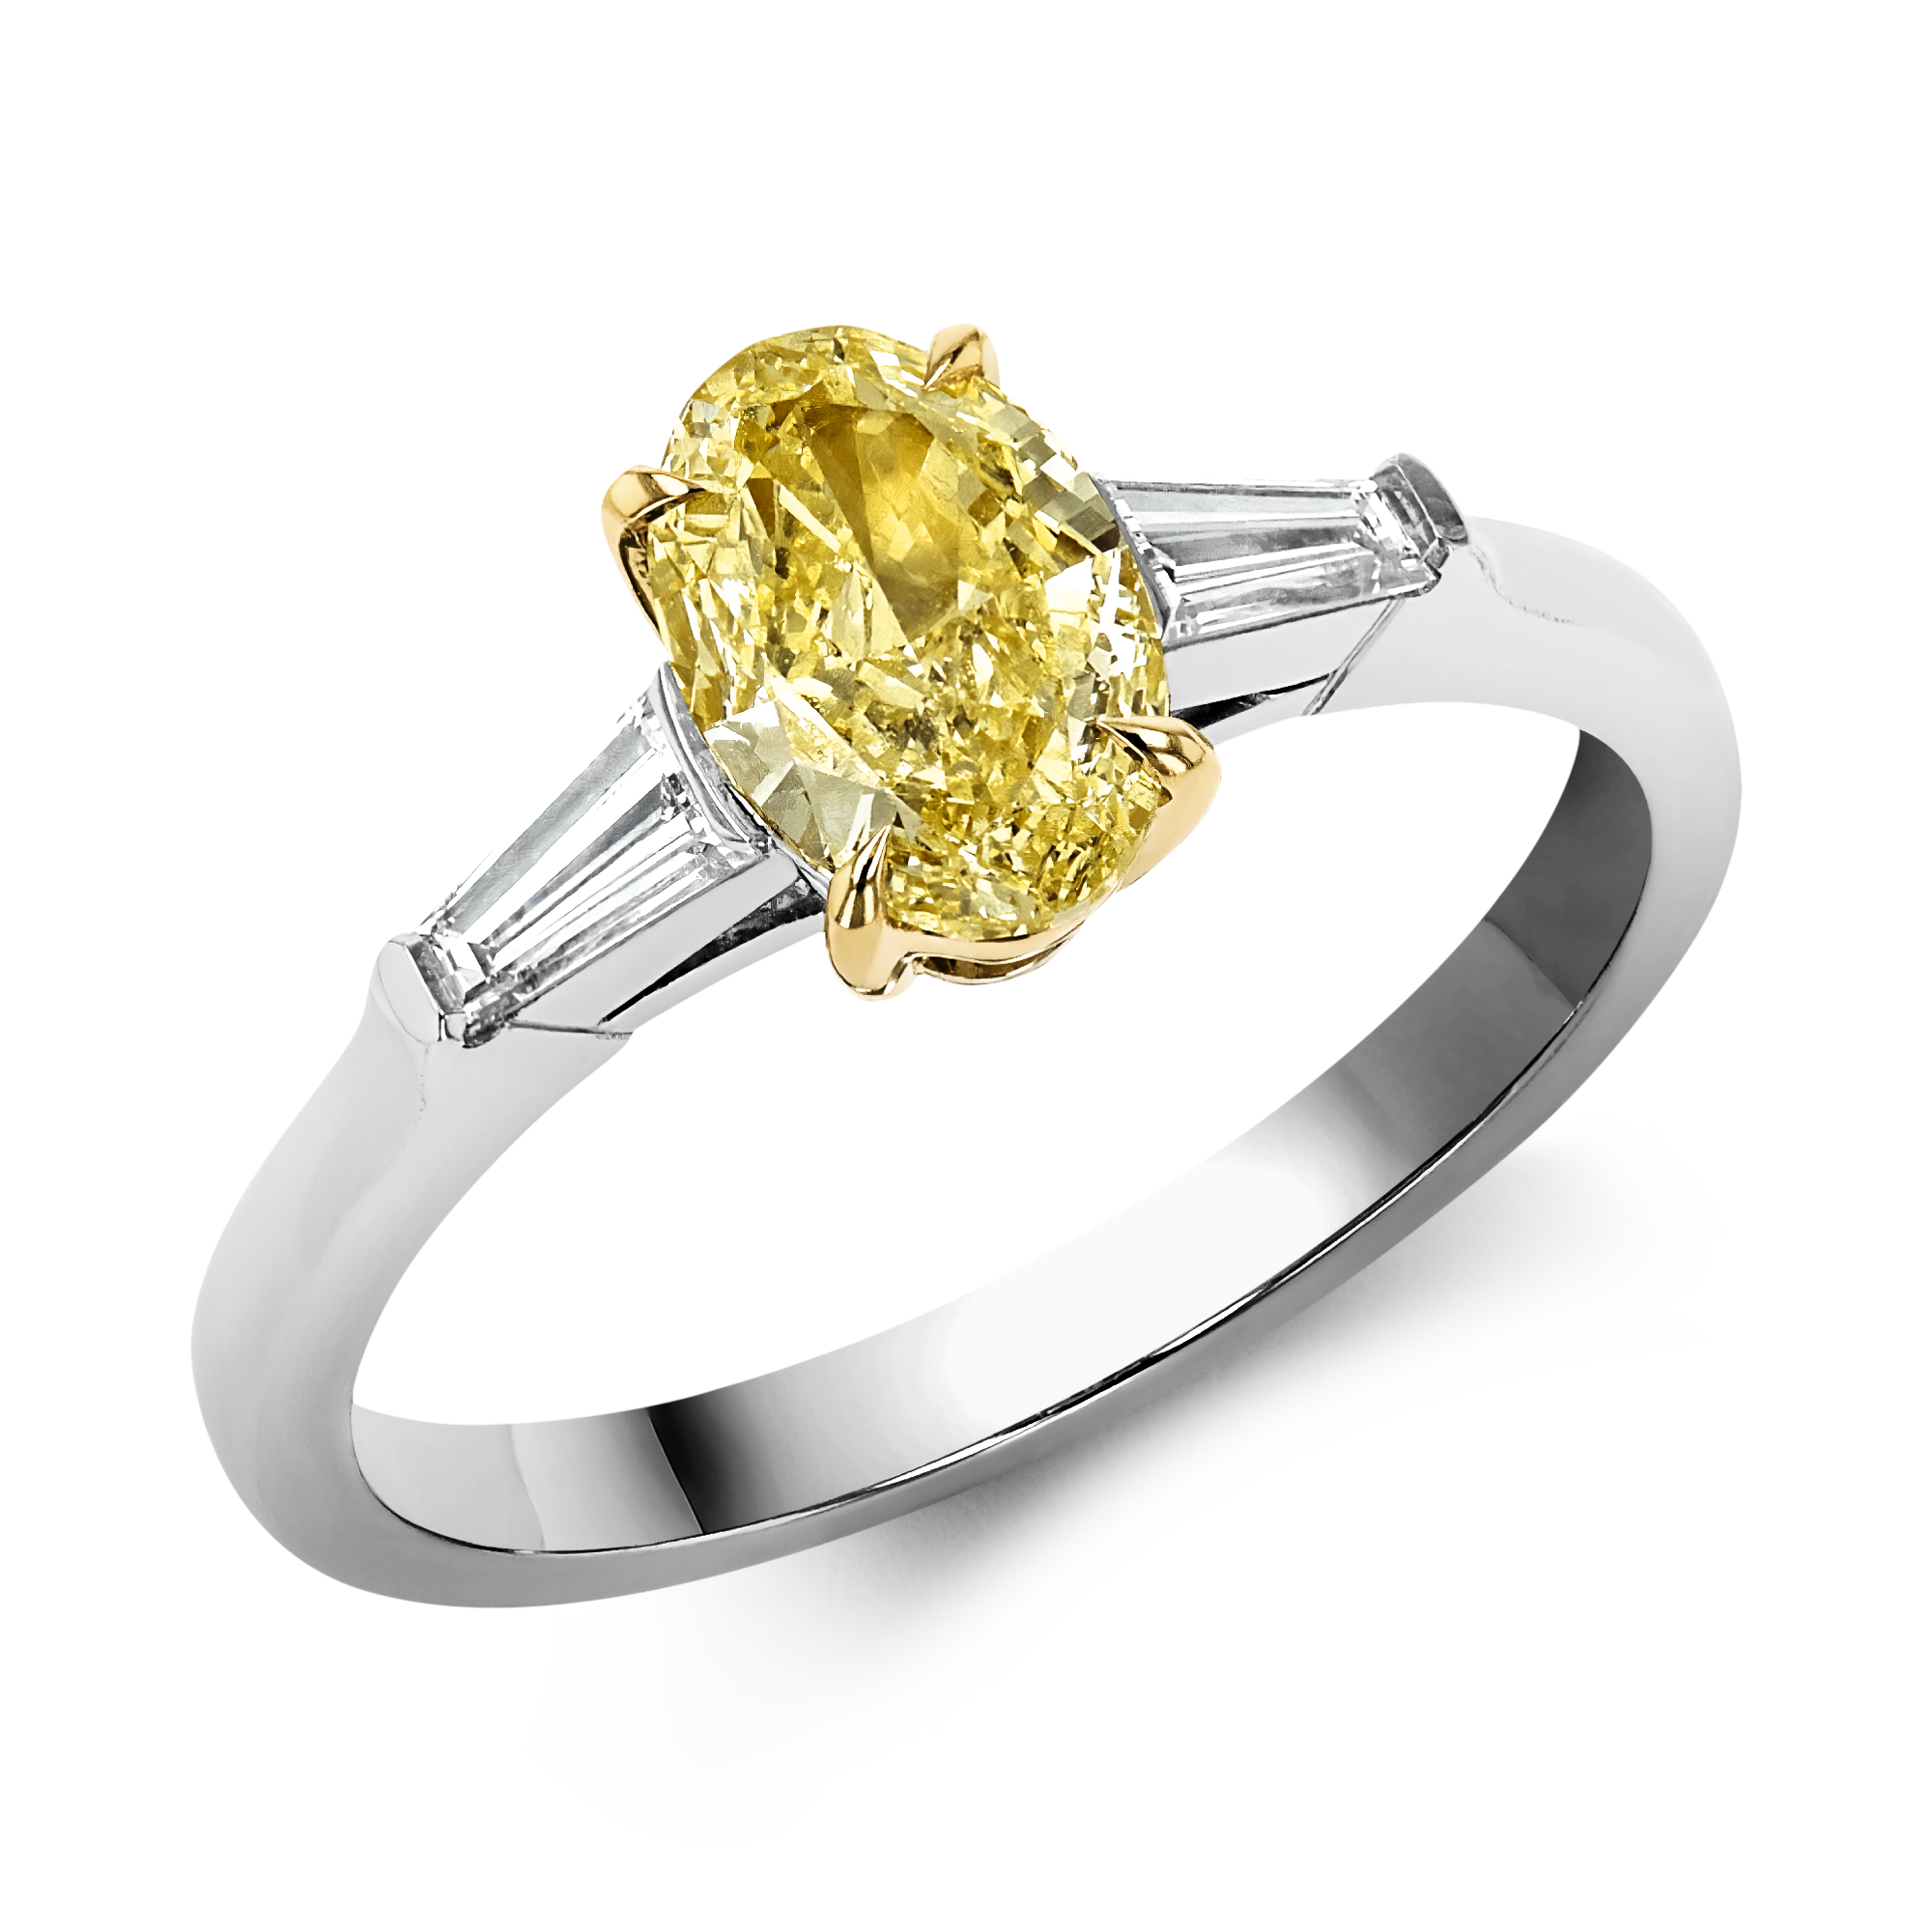 Regency 1.01ct Fancy Yellow Diamond Solitaire Ring Oval Cut, Claw Set_1